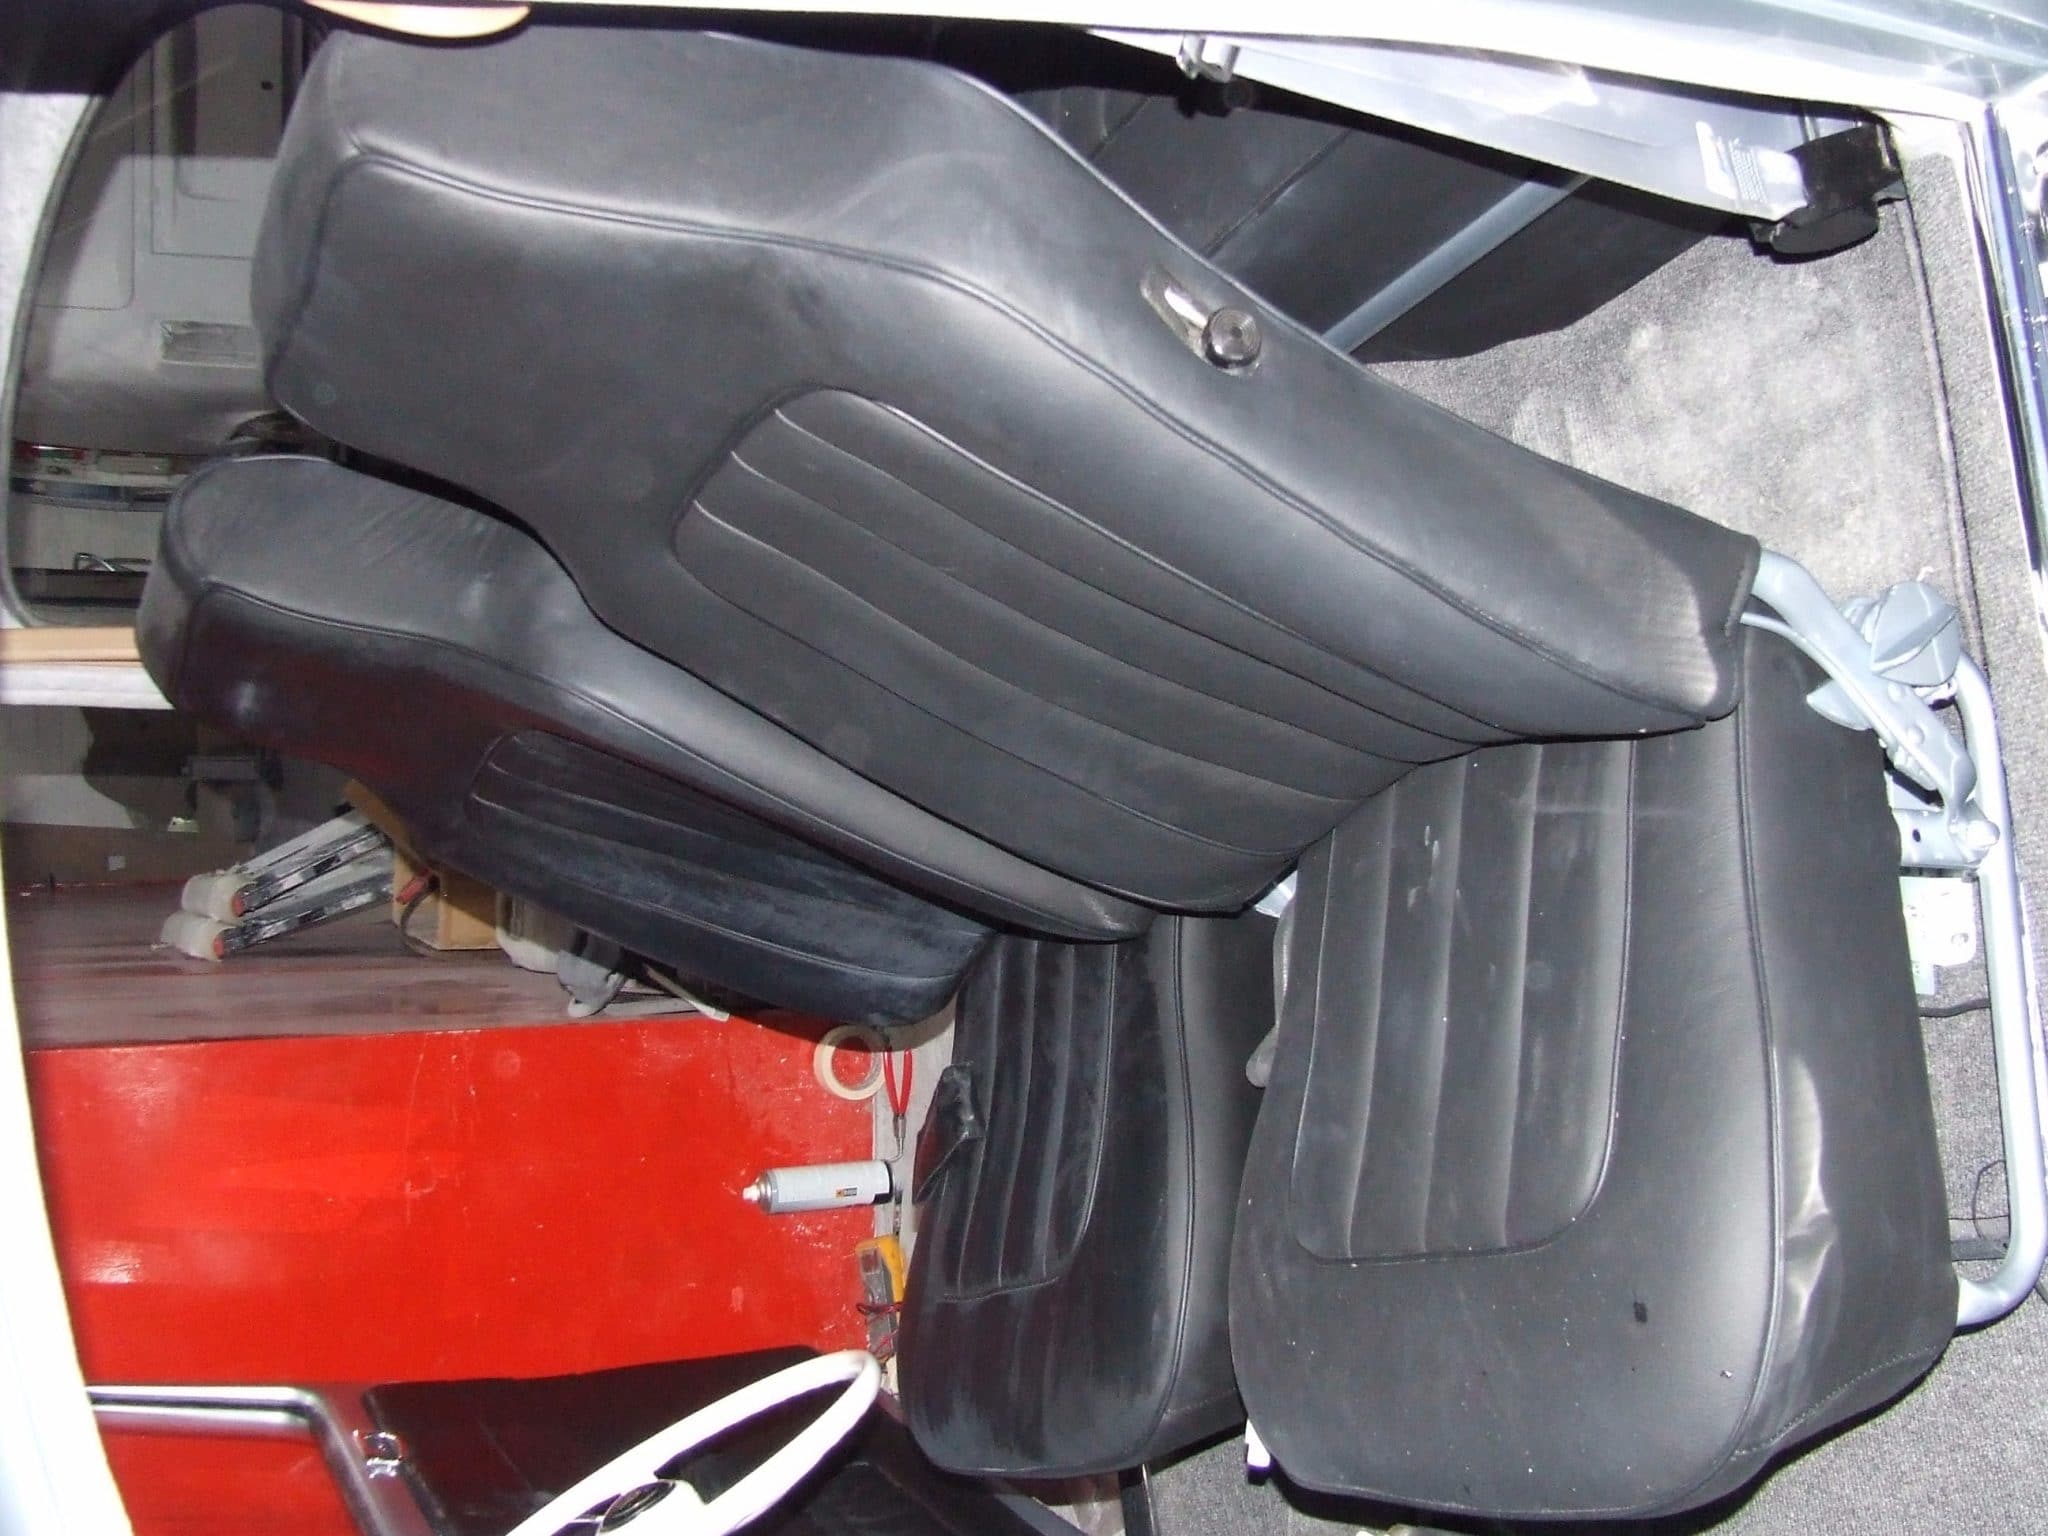 leather seat before restoration